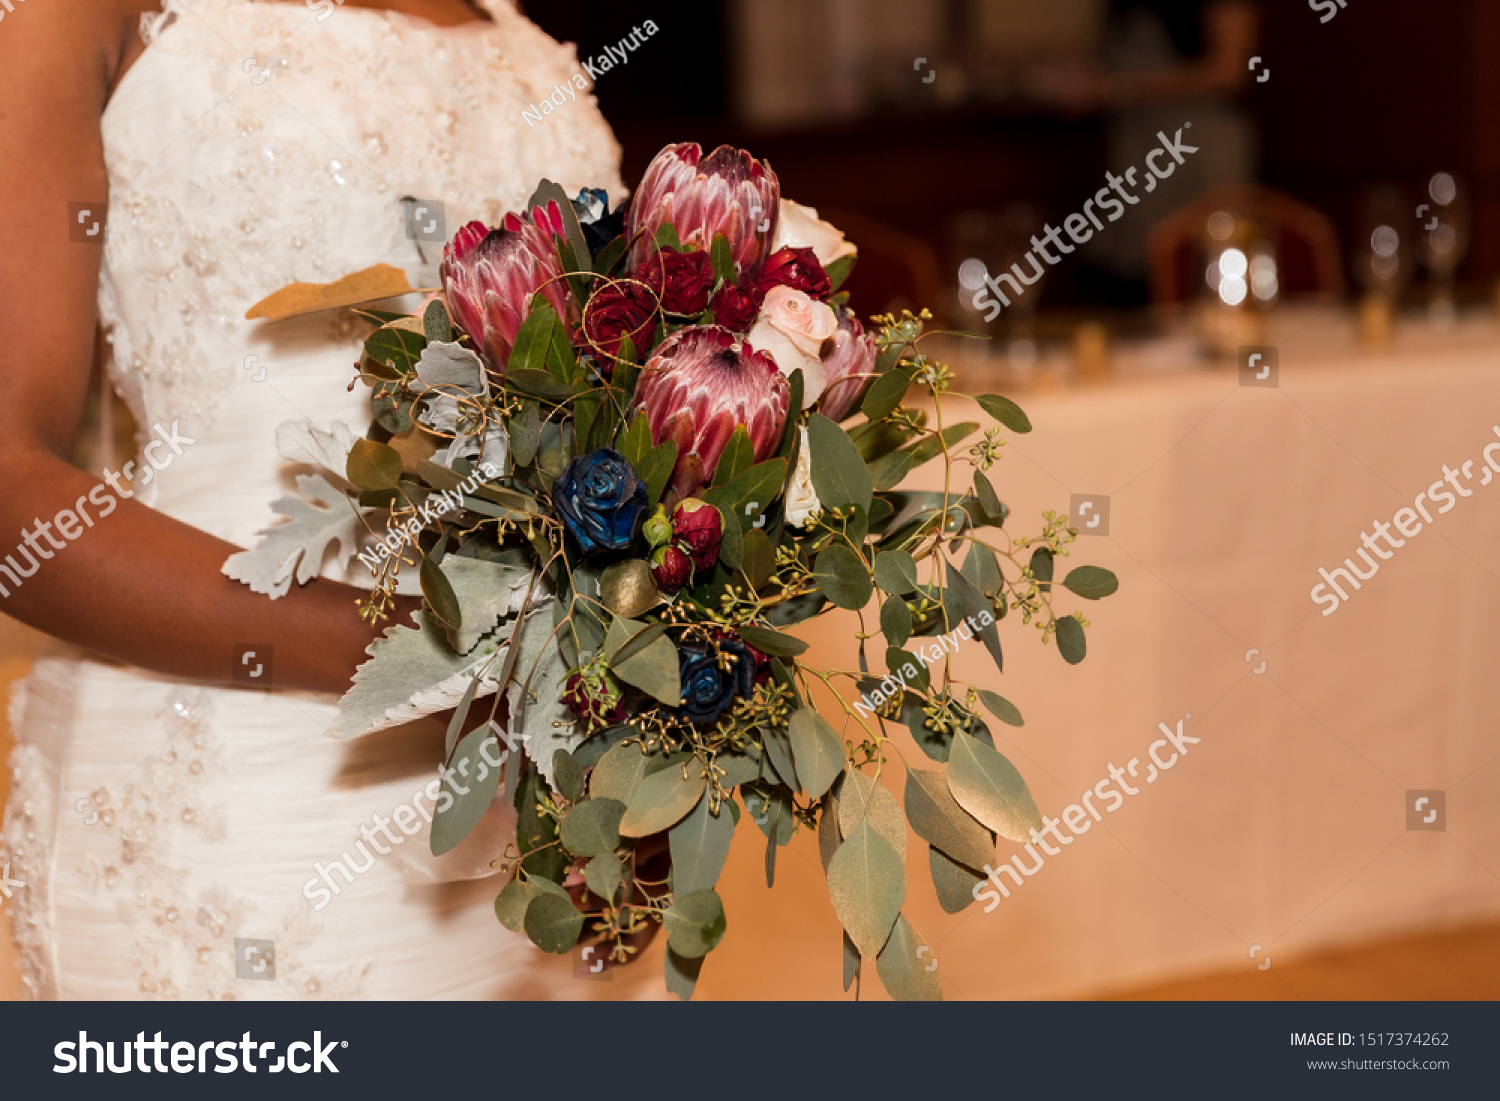 Bride Holding Wedding Bouquet Red Flowers Stock Photo Edit Now 1517374262